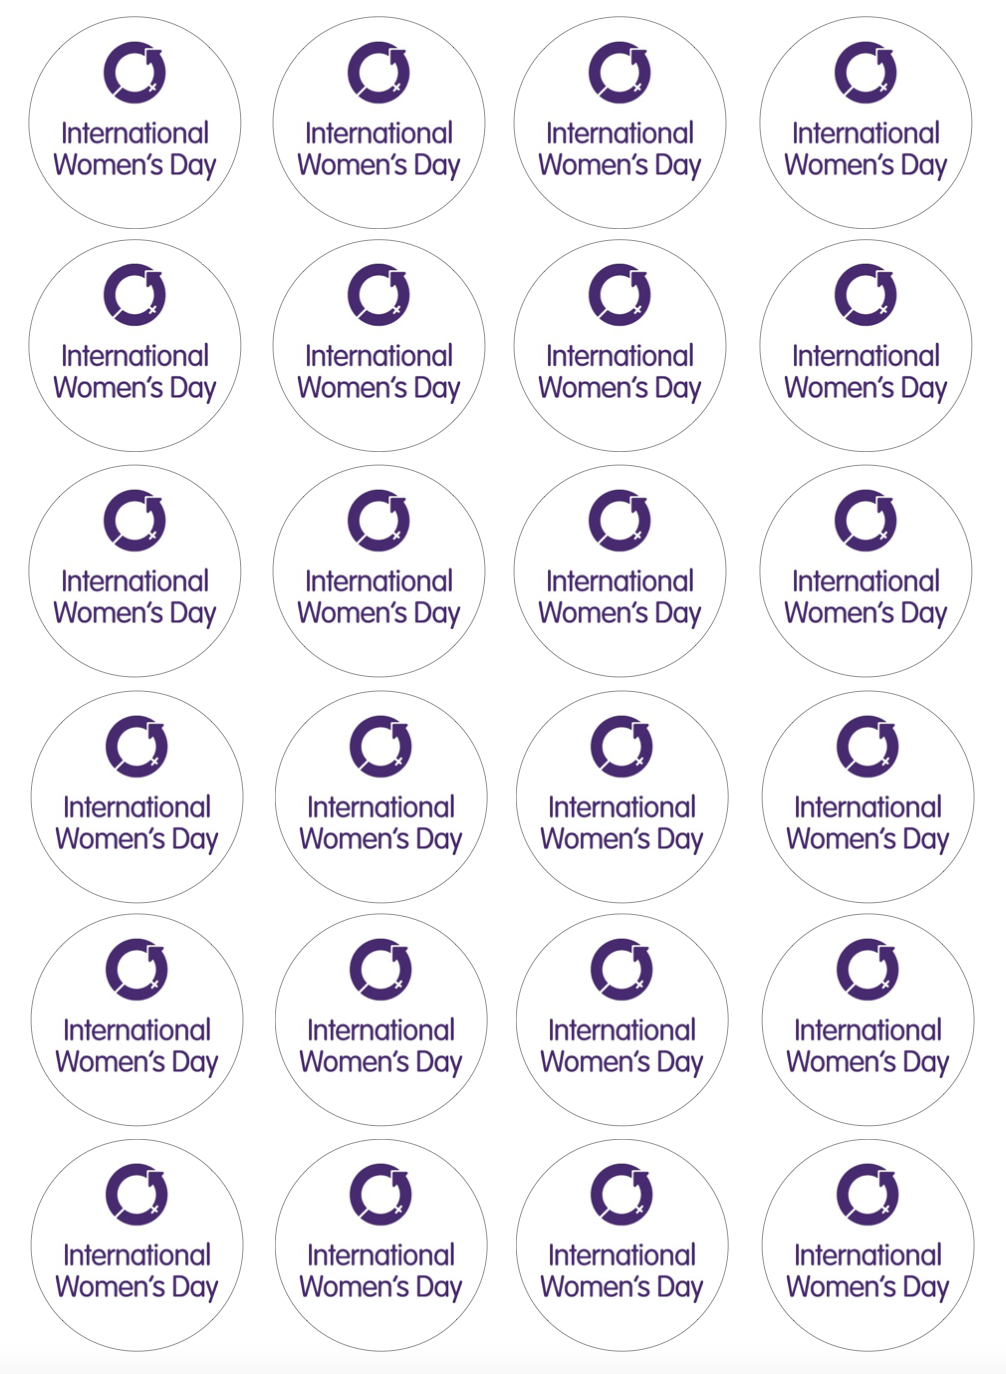 International Women's Day 2 Cupcake Edible Icing Image Toppers